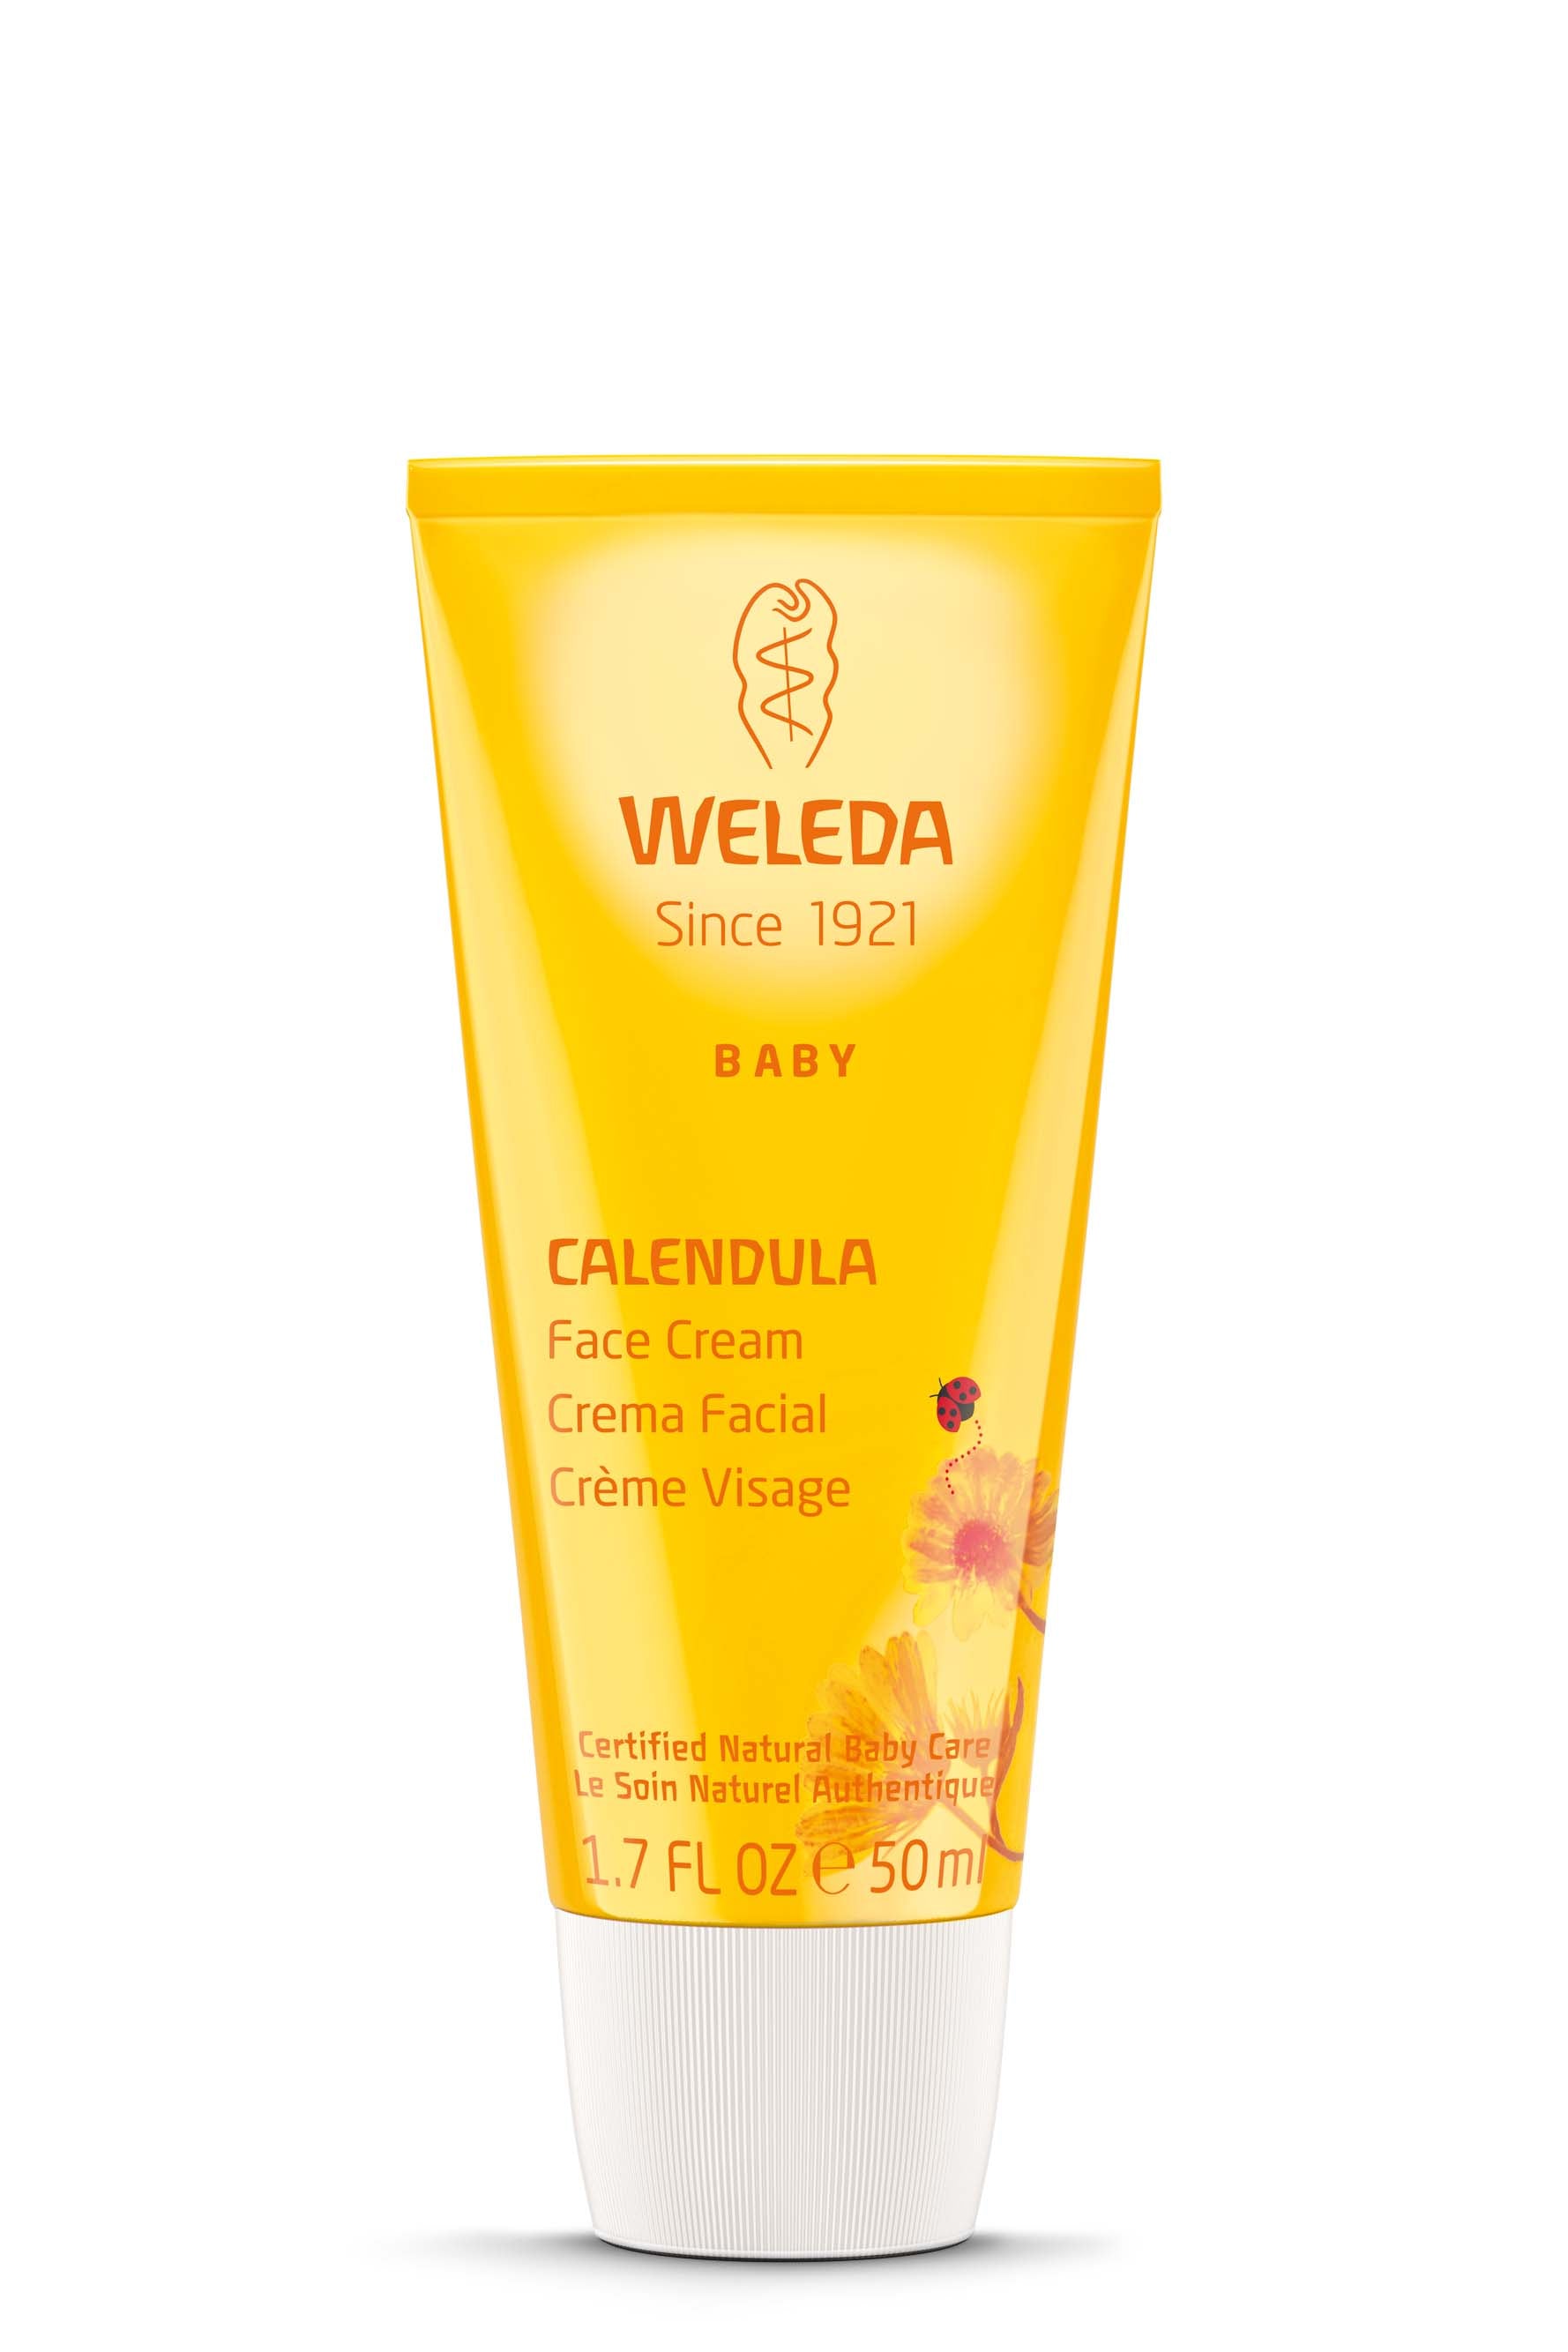 Almond Soothing Facial Cream 1 oz By Weleda